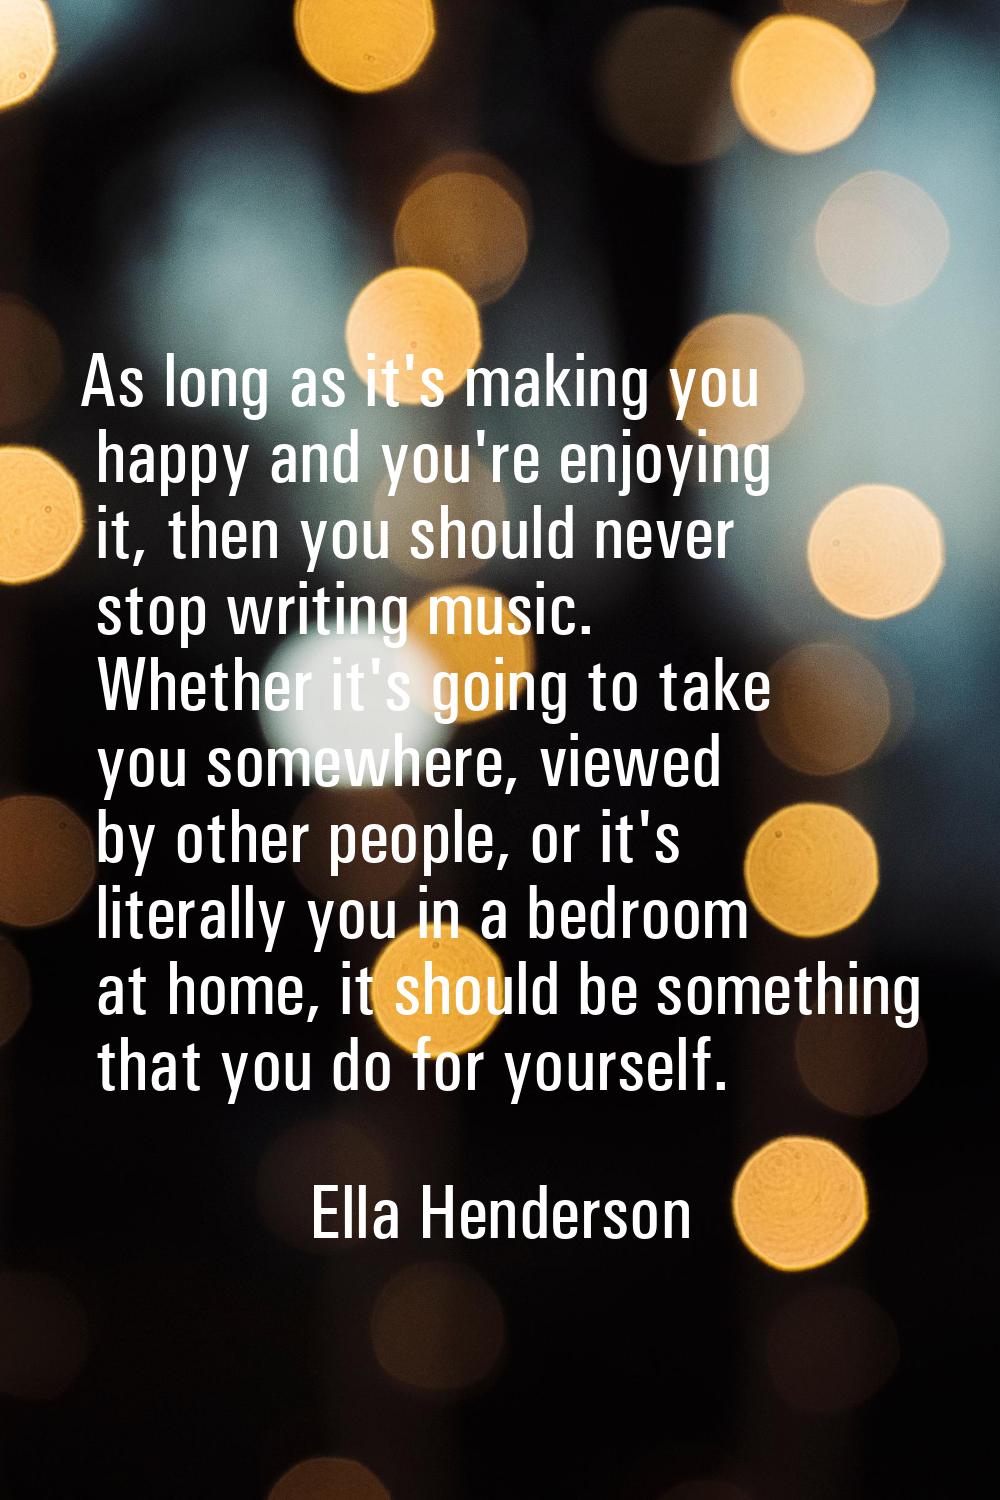 As long as it's making you happy and you're enjoying it, then you should never stop writing music. 